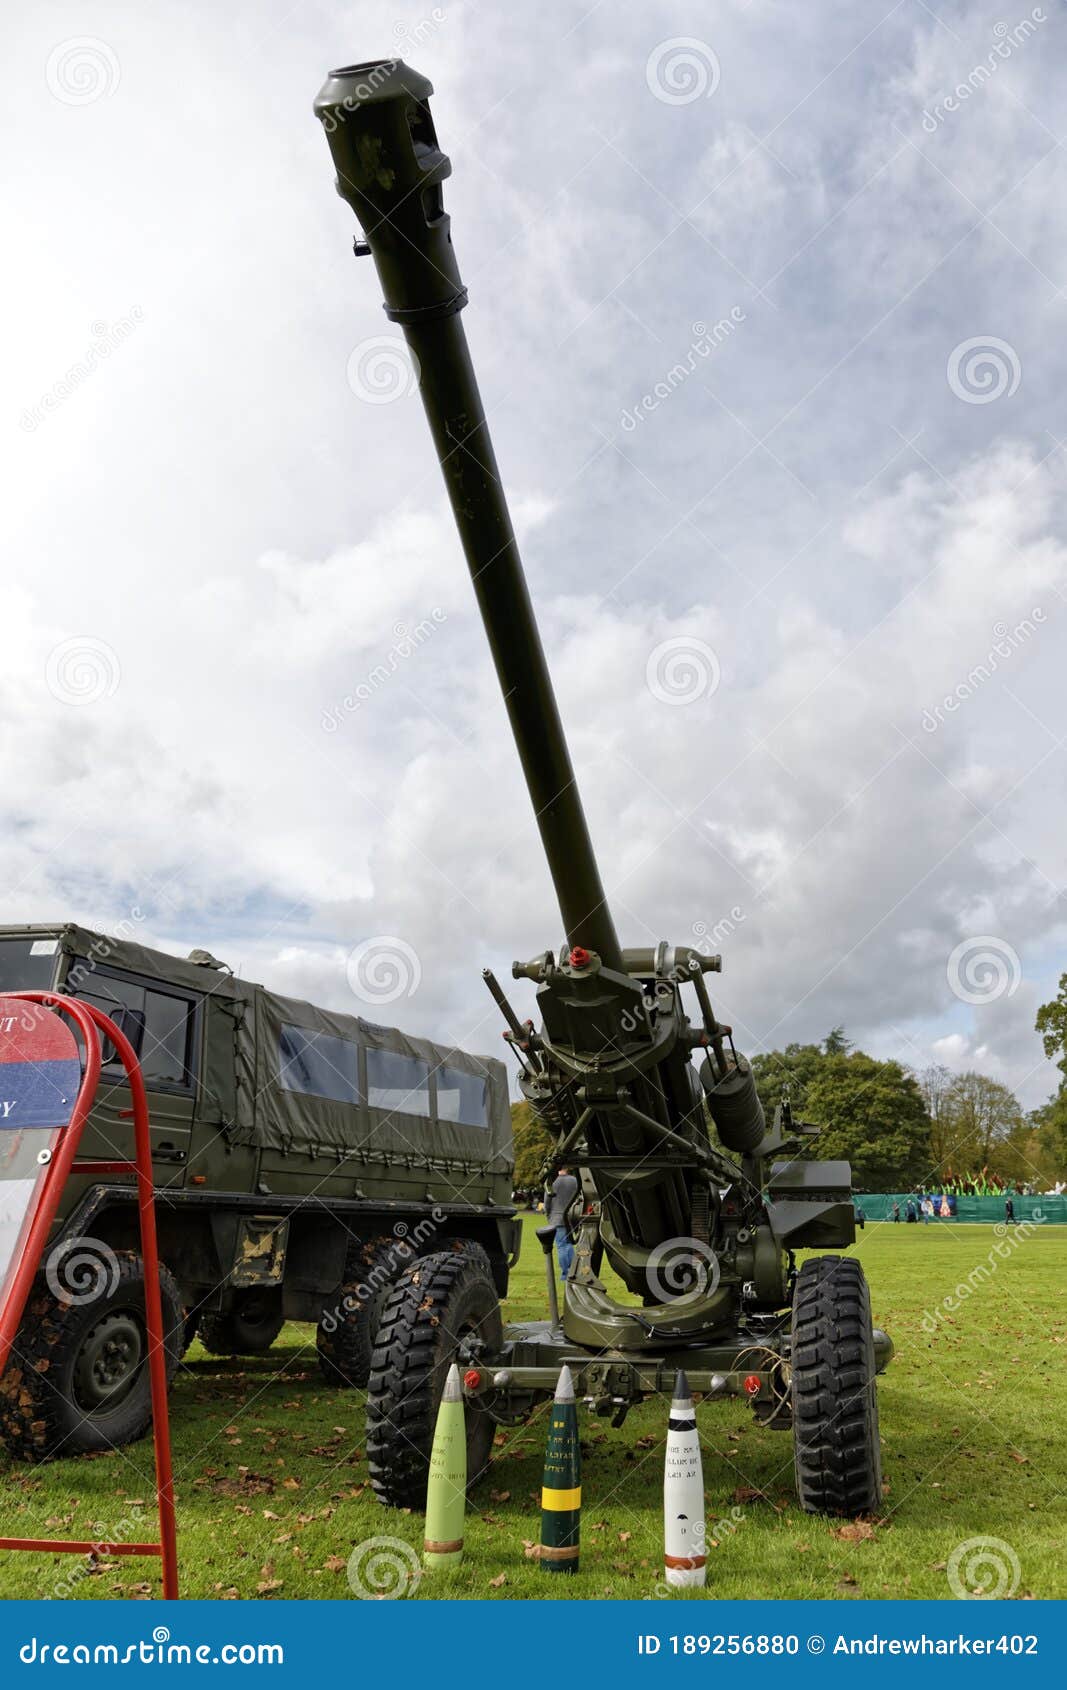 British Army 105mm Light Gun Editorial Image Image of explosives, show: